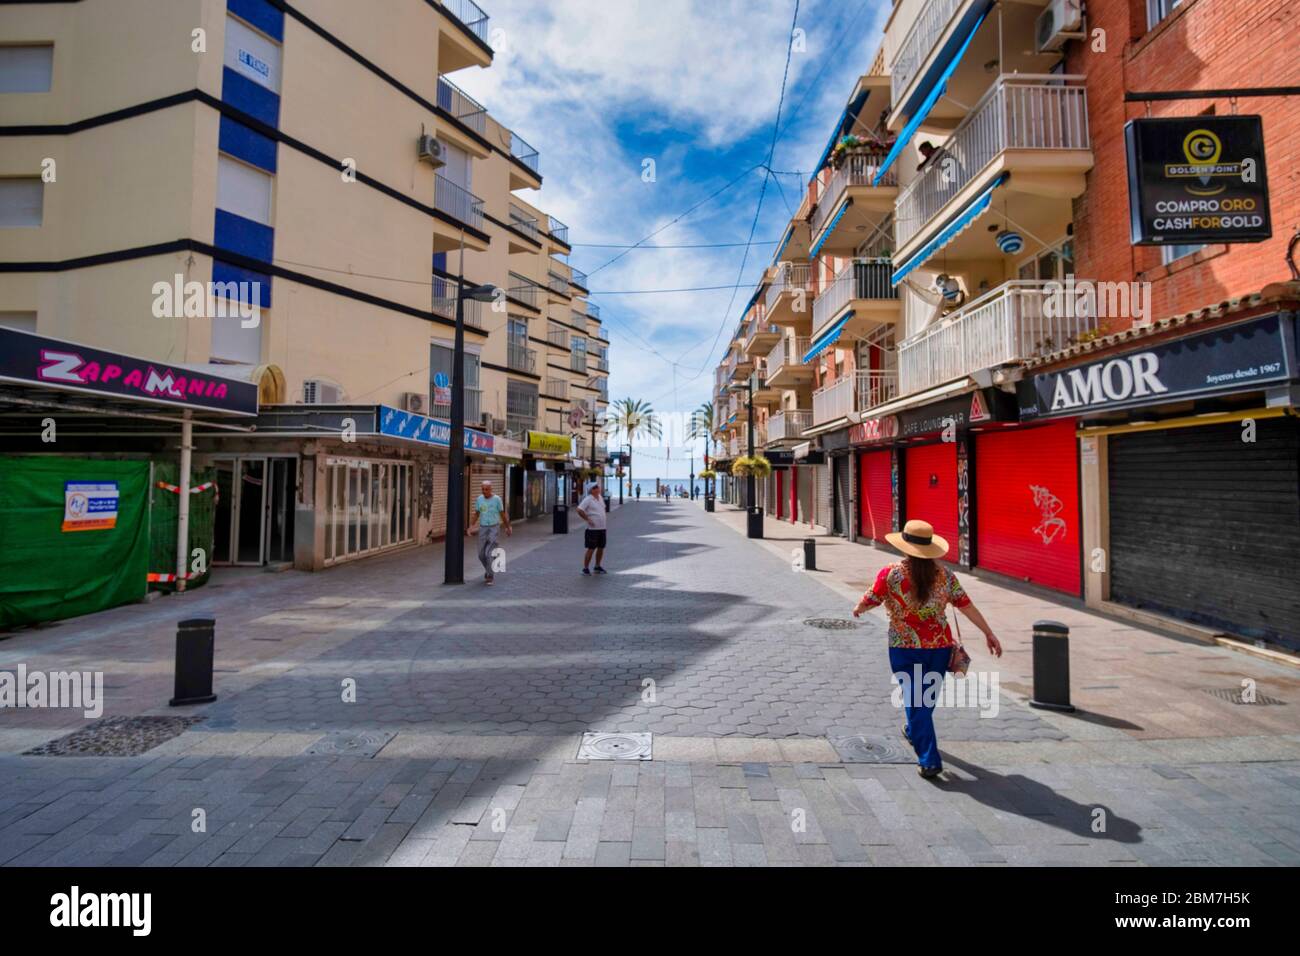 Benidorm, Alicante Spain, 4.5.2020, Corona crisis: closed restaurants and shops in the pedestrian area of the old town. Stock Photo